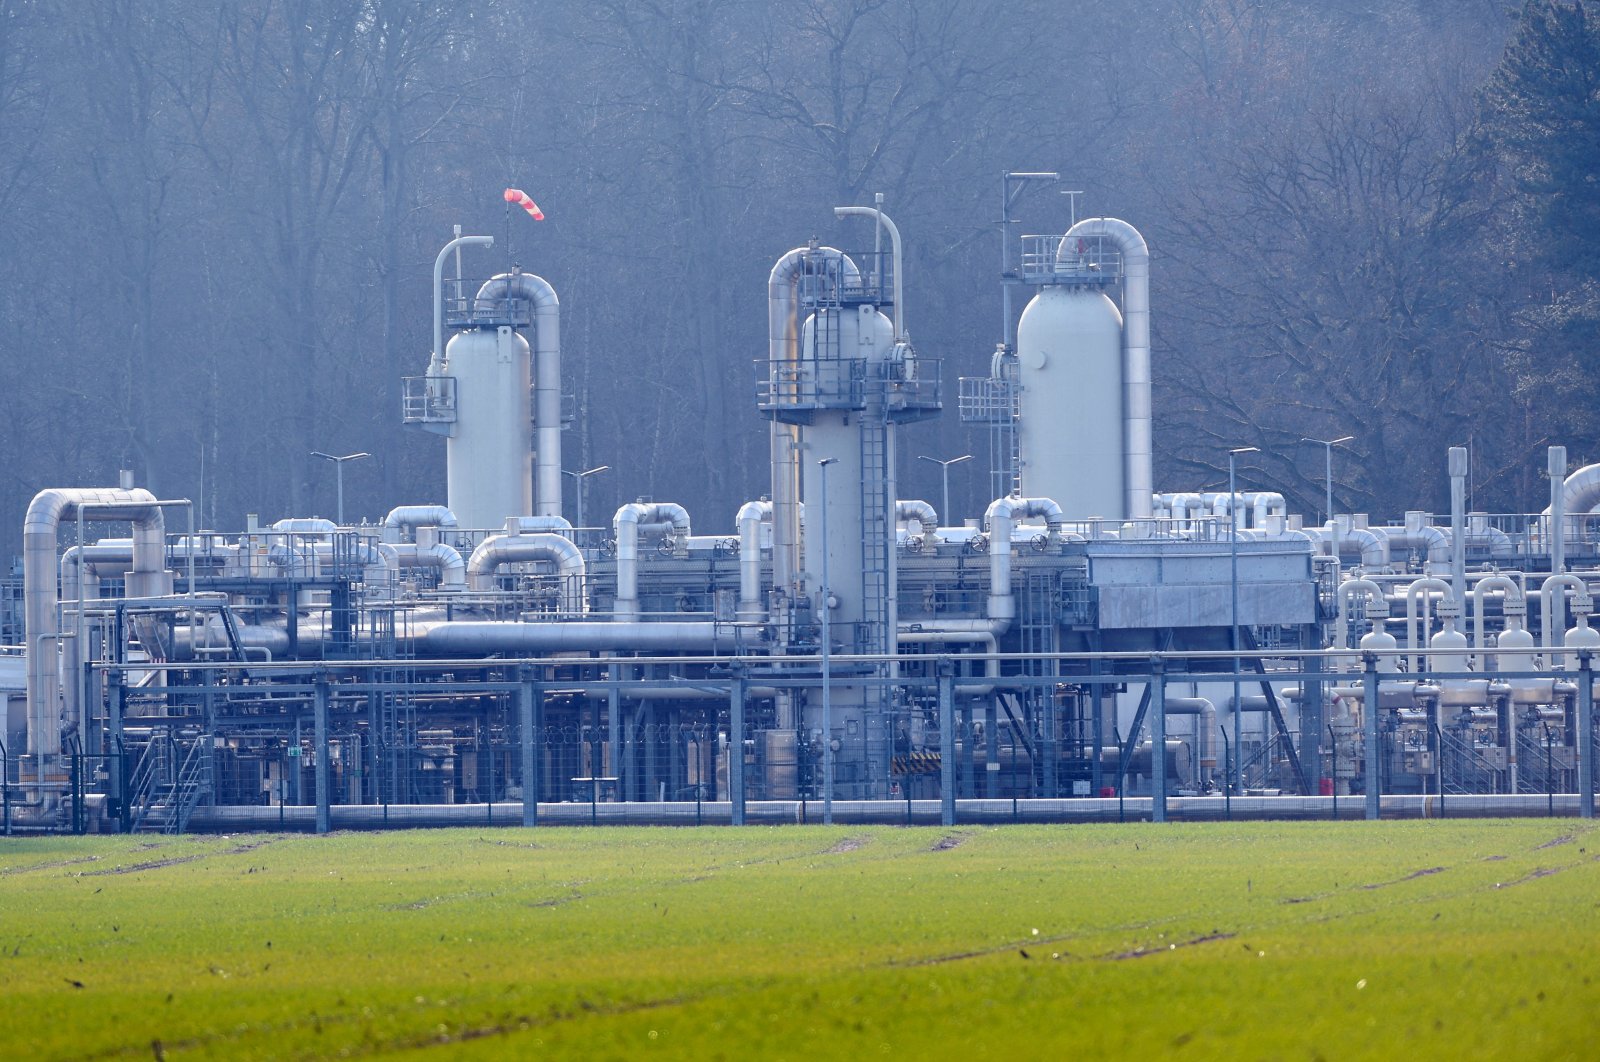 The Astora natural gas depot, which is the largest natural gas storage in Western Europe, is pictured in Rehden, Germany, March 16, 2022. (Reuters Photo)